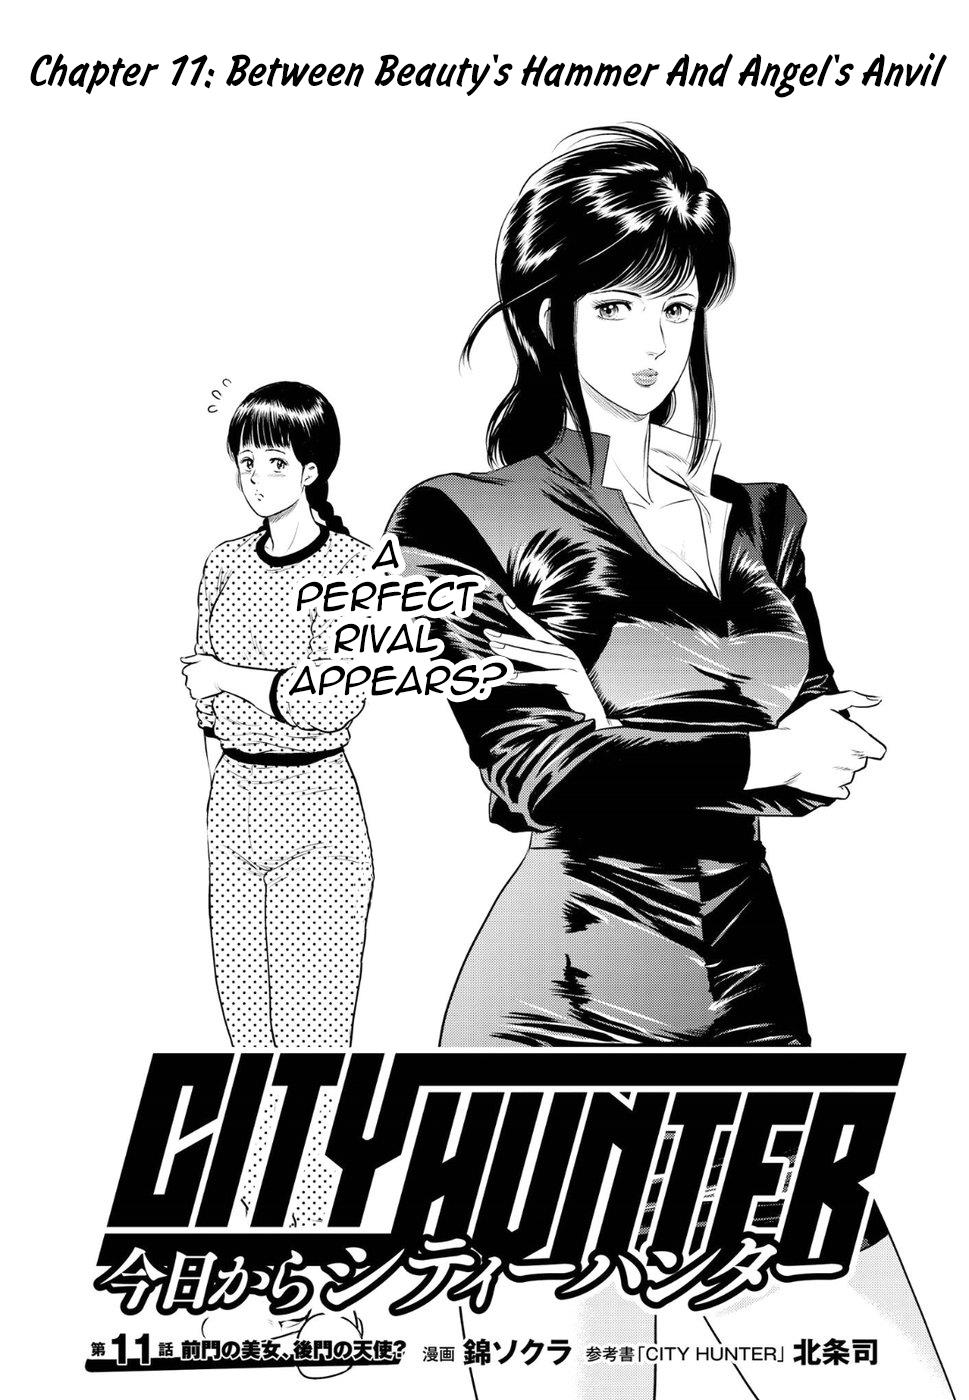 City Hunter - Rebirth Vol.2 Chapter 11: Between Beaty's Hammer And Angel's Anvil - Picture 1